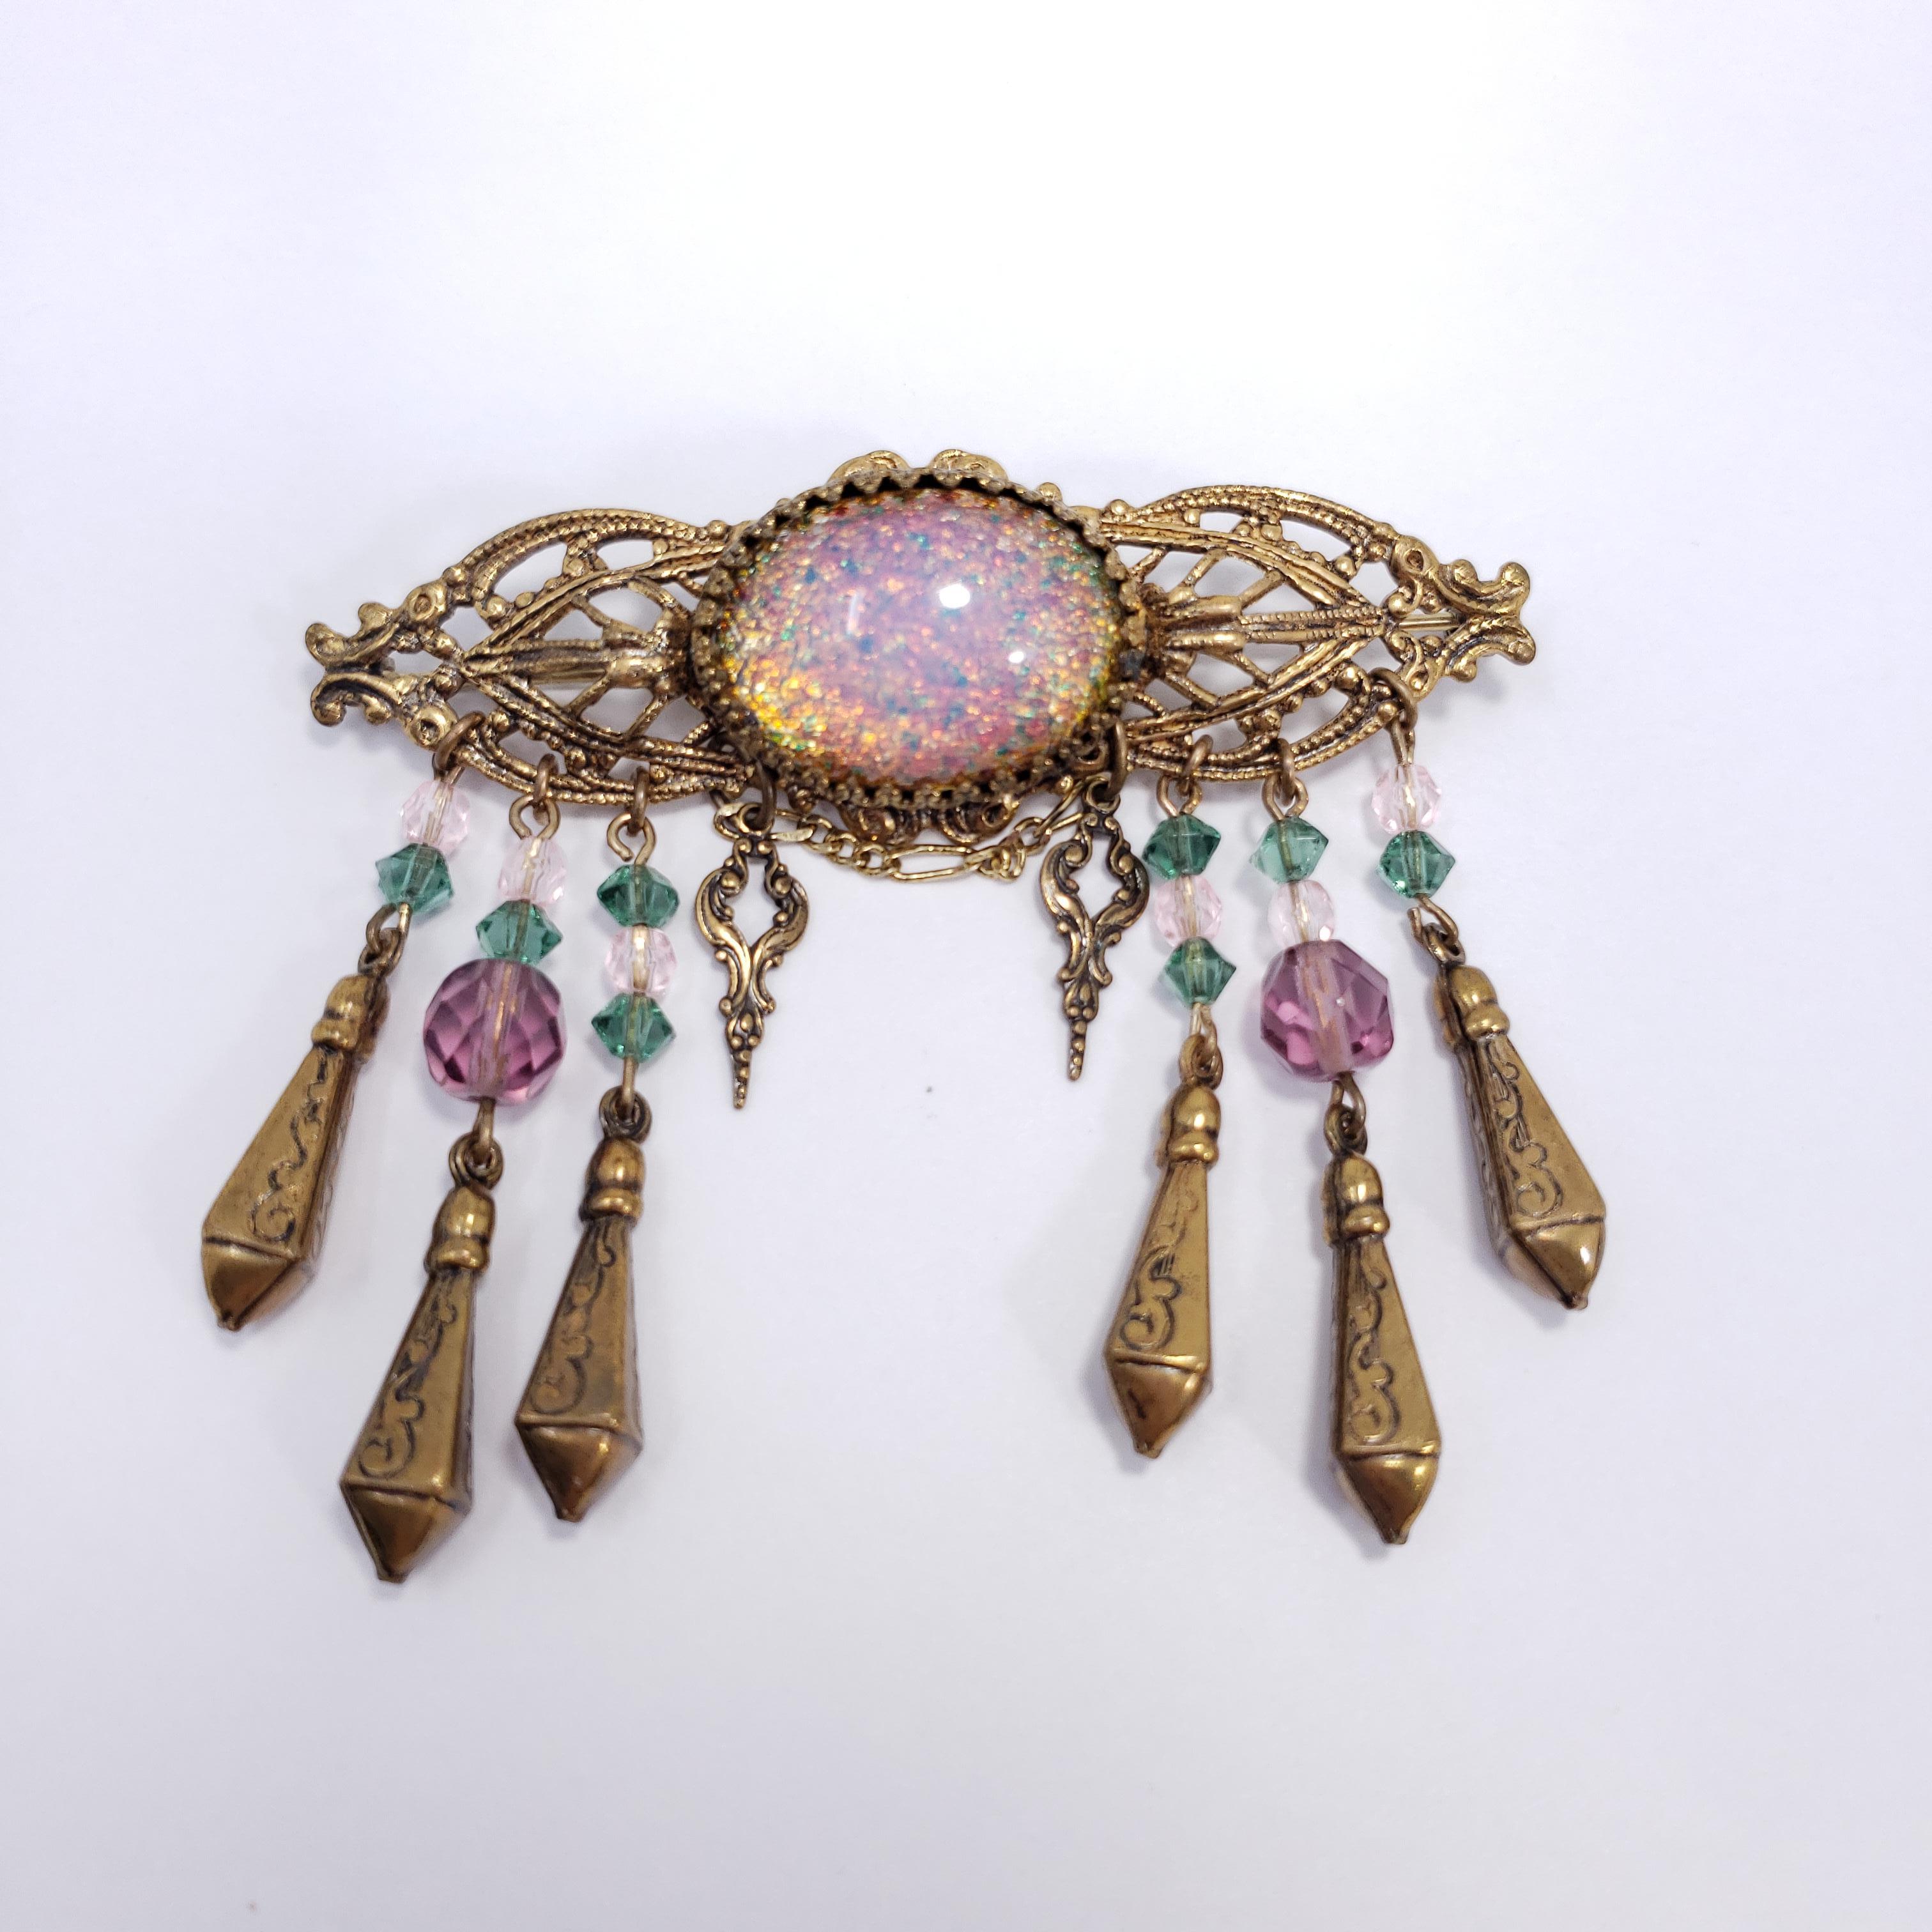 Gorgeous pin brooch by Sadie Green. Features a centerpiece cosmic faux opal cabochon in a Victorian-style setting, accented with faceted crystals and dangling accents.

Marks / hallmarks / etc: Sadie Green